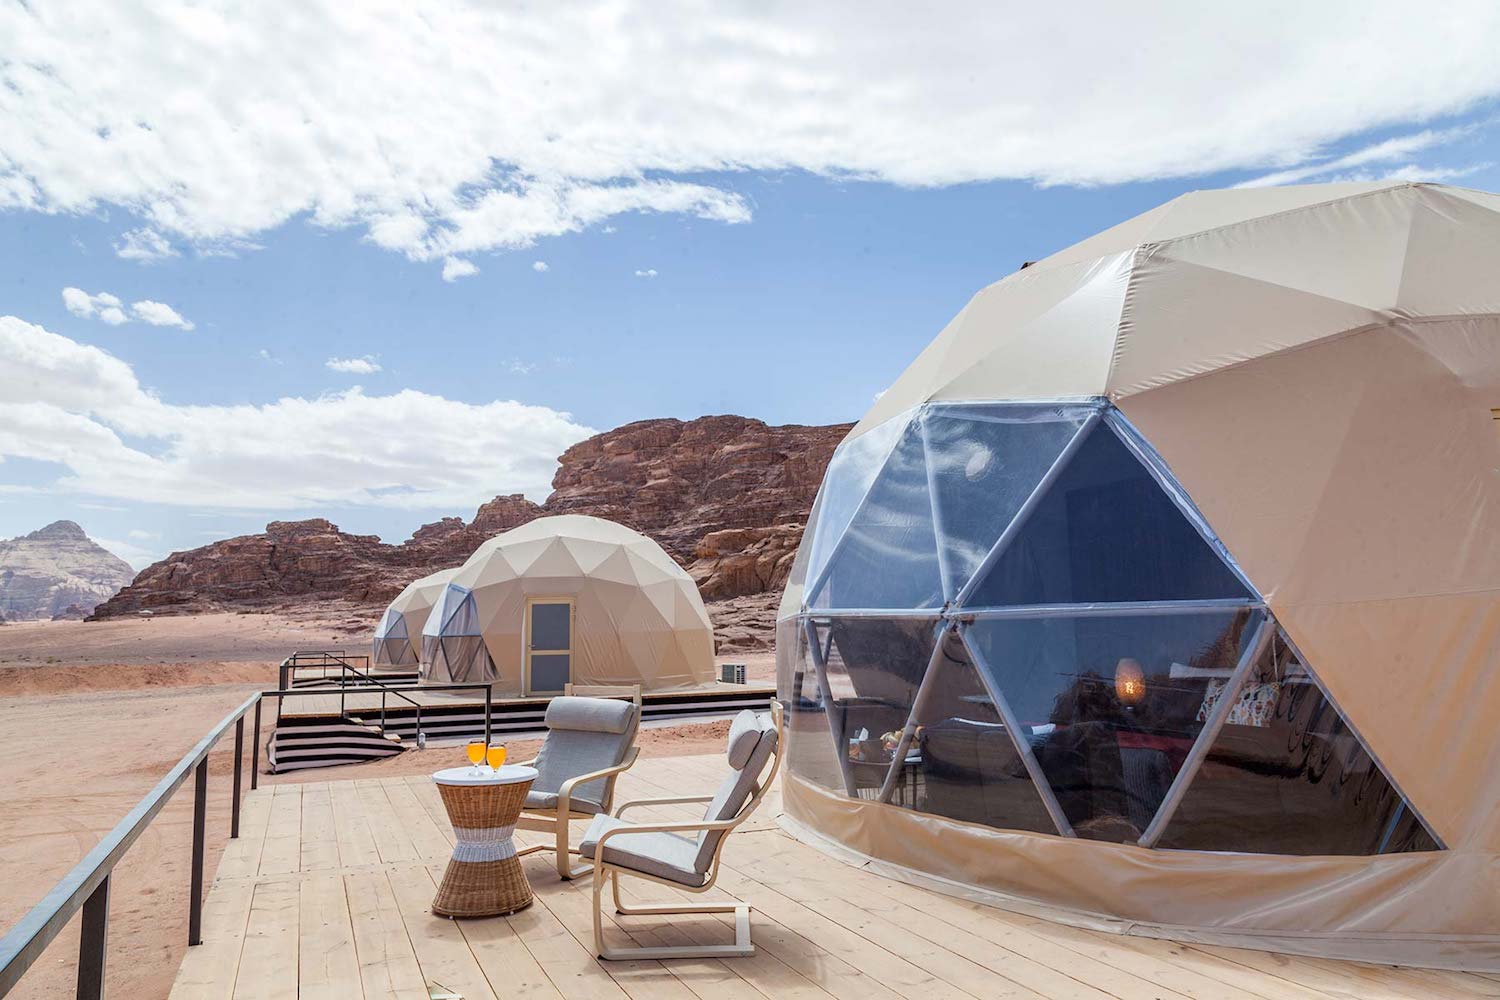 Bubble hotels are replacing glamping — here’s where you can stay in one